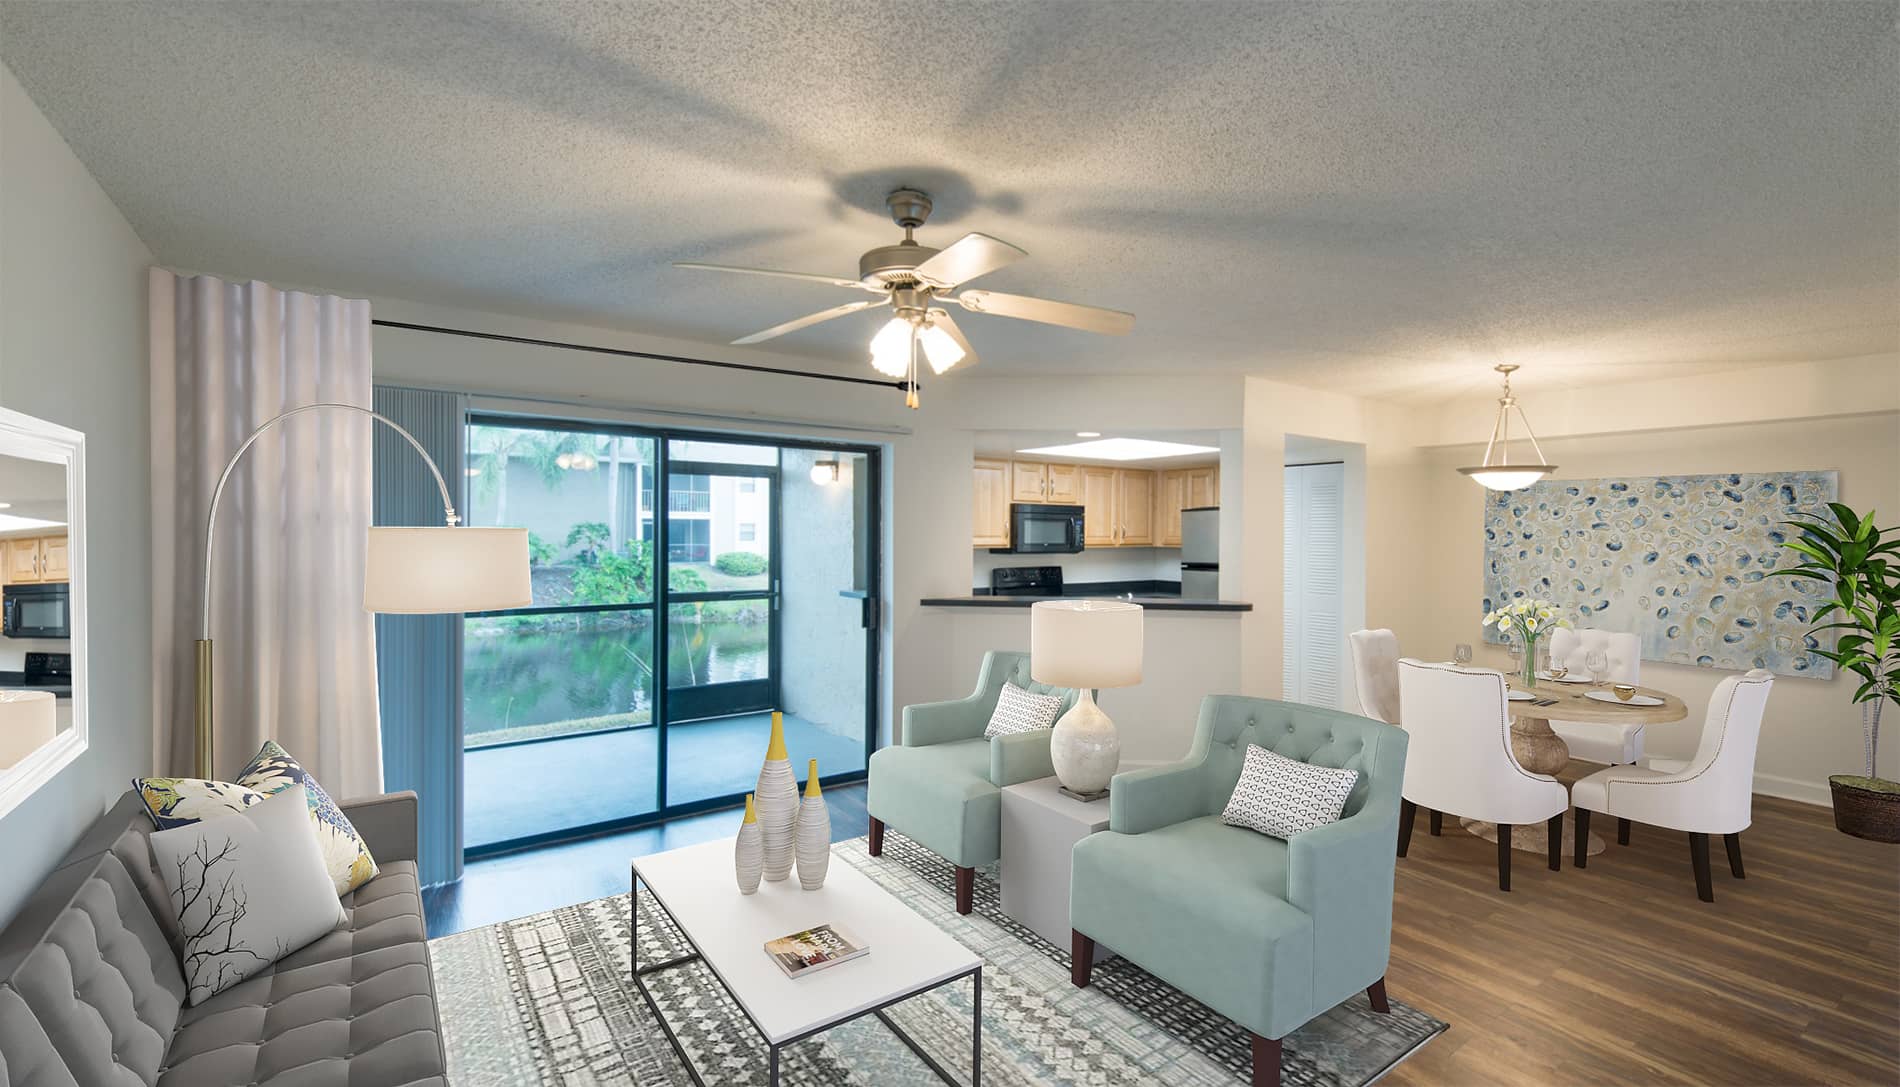 Inlet Bay at Gateway Living Room staged by RooOmy